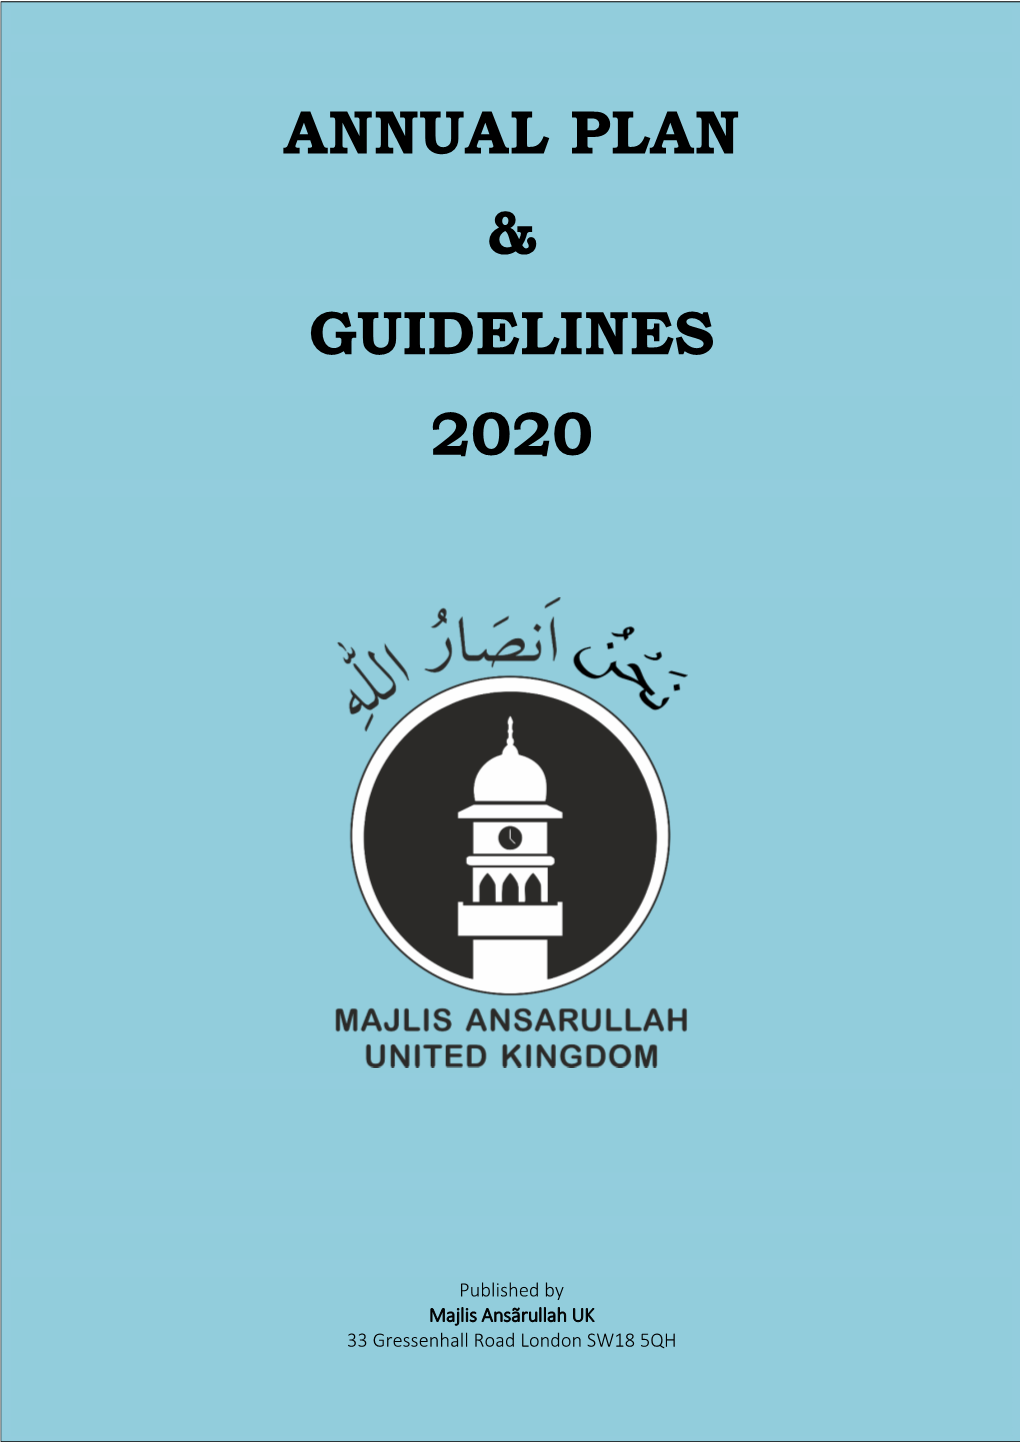 Annual Plan & Guidelines 2020